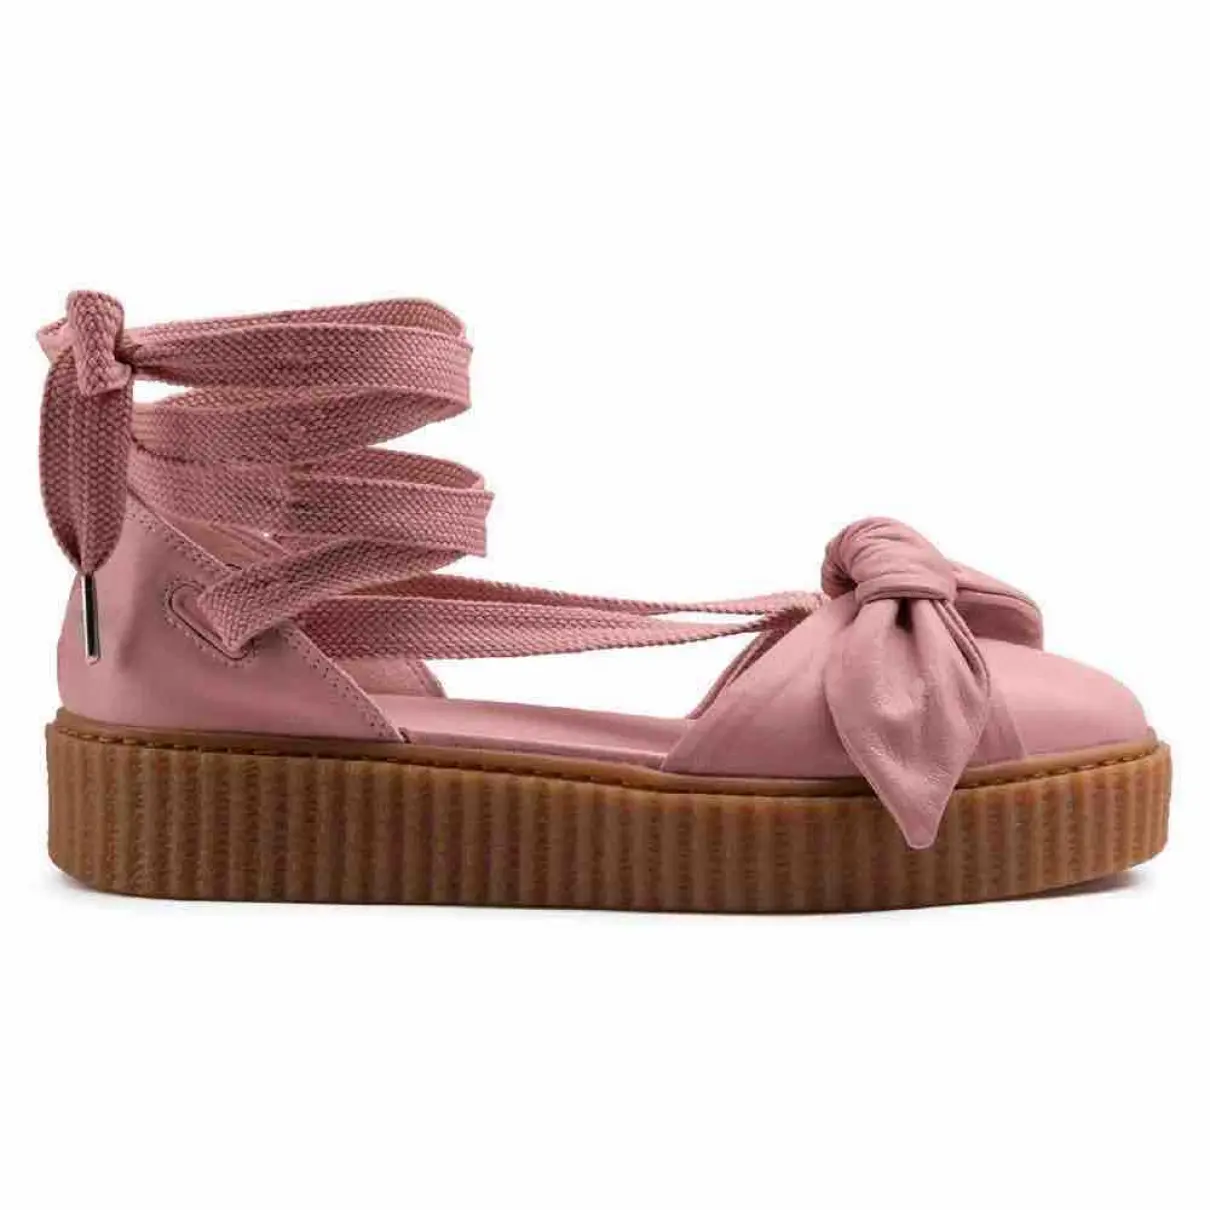 Fenty x Puma Leather trainers for sale